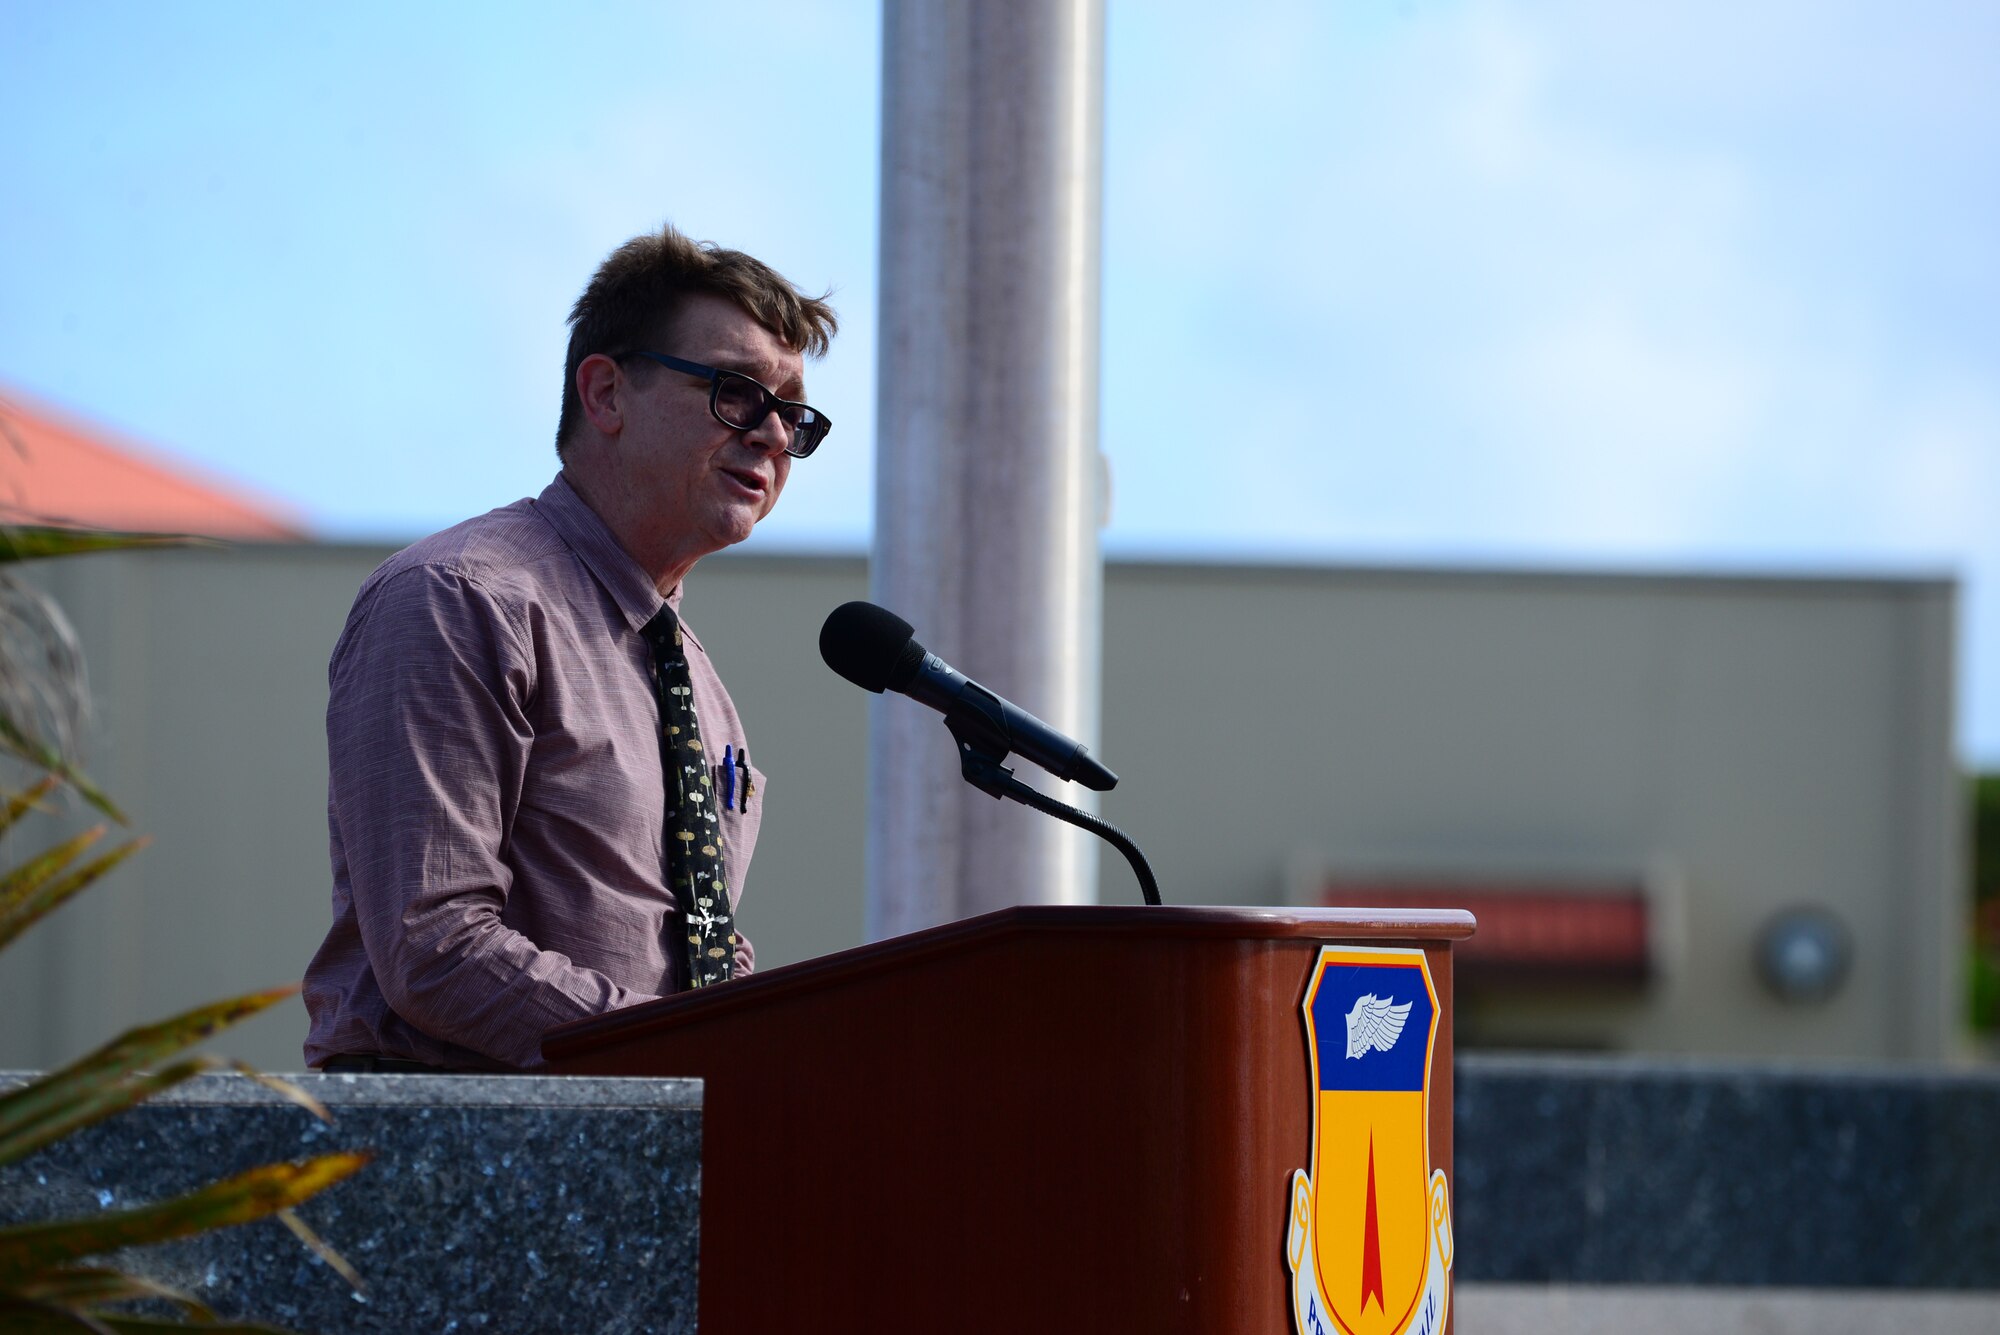 Jeffrey Meyer, 36th Wing historian, speaks at the Operation Linebacker II Remembrance Ceremony Dec. 16, 2016, at Andersen Air Force Base, Guam. During the operation in Dec. 18-29, 1972, more than 700 sorties were flown to North Vietnam out of Andersen AFB and U-Tapao Royal Thai Air Base, Thailand, in hopes to bring North Vietnam back to negotiations. (U.S. Air Force photo/Airman 1st Class Jacob Skovo)